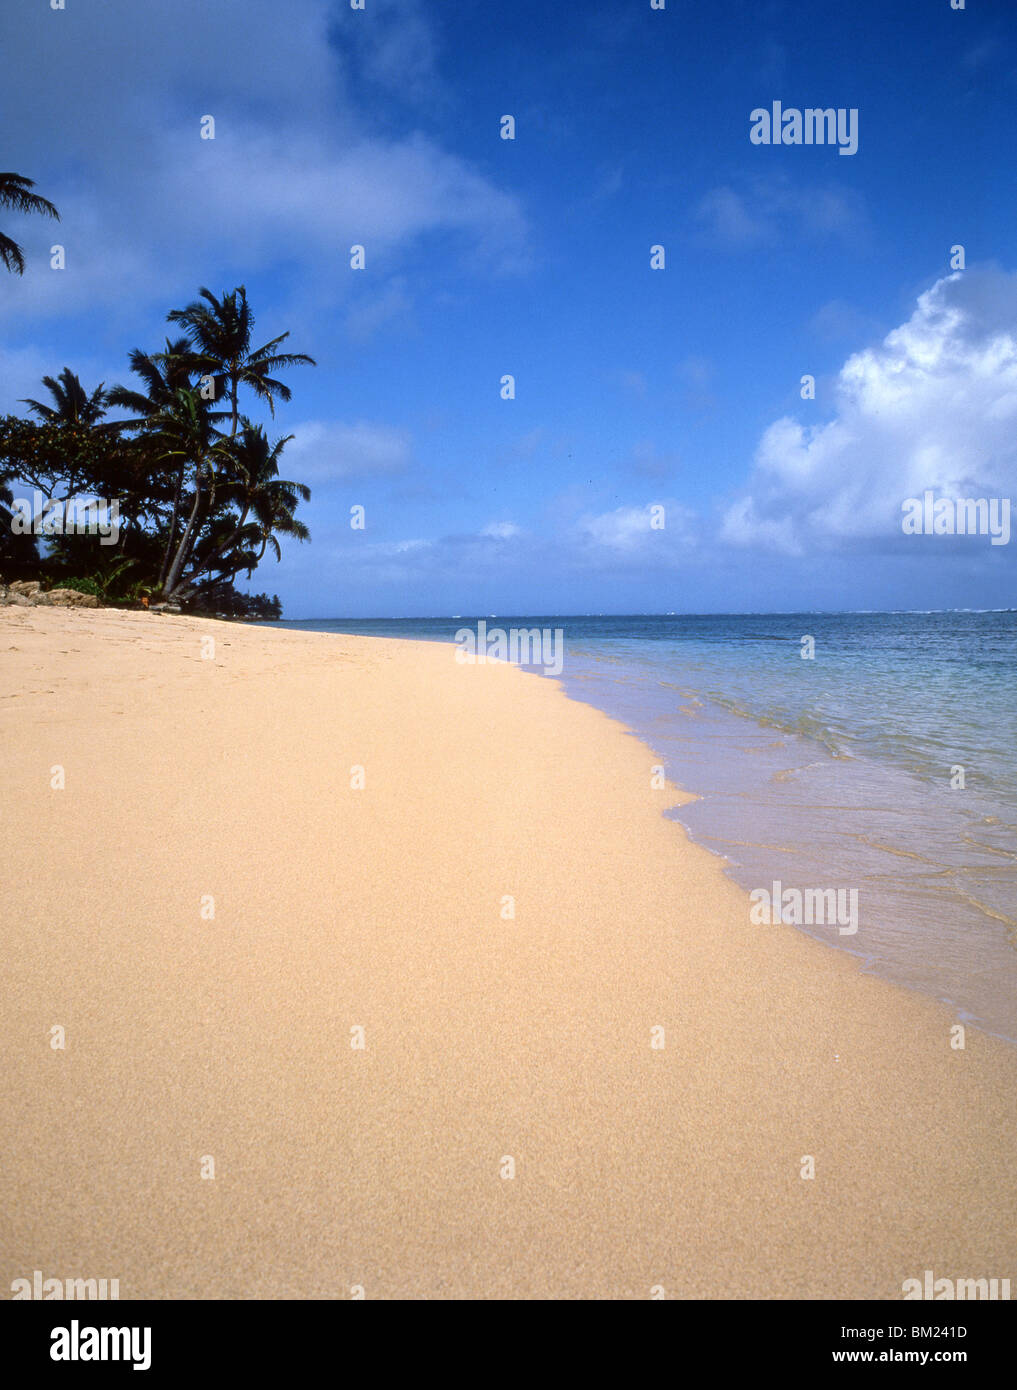 Plage déserte, North Shore, Oahu, Hawaii, United States of America Banque D'Images